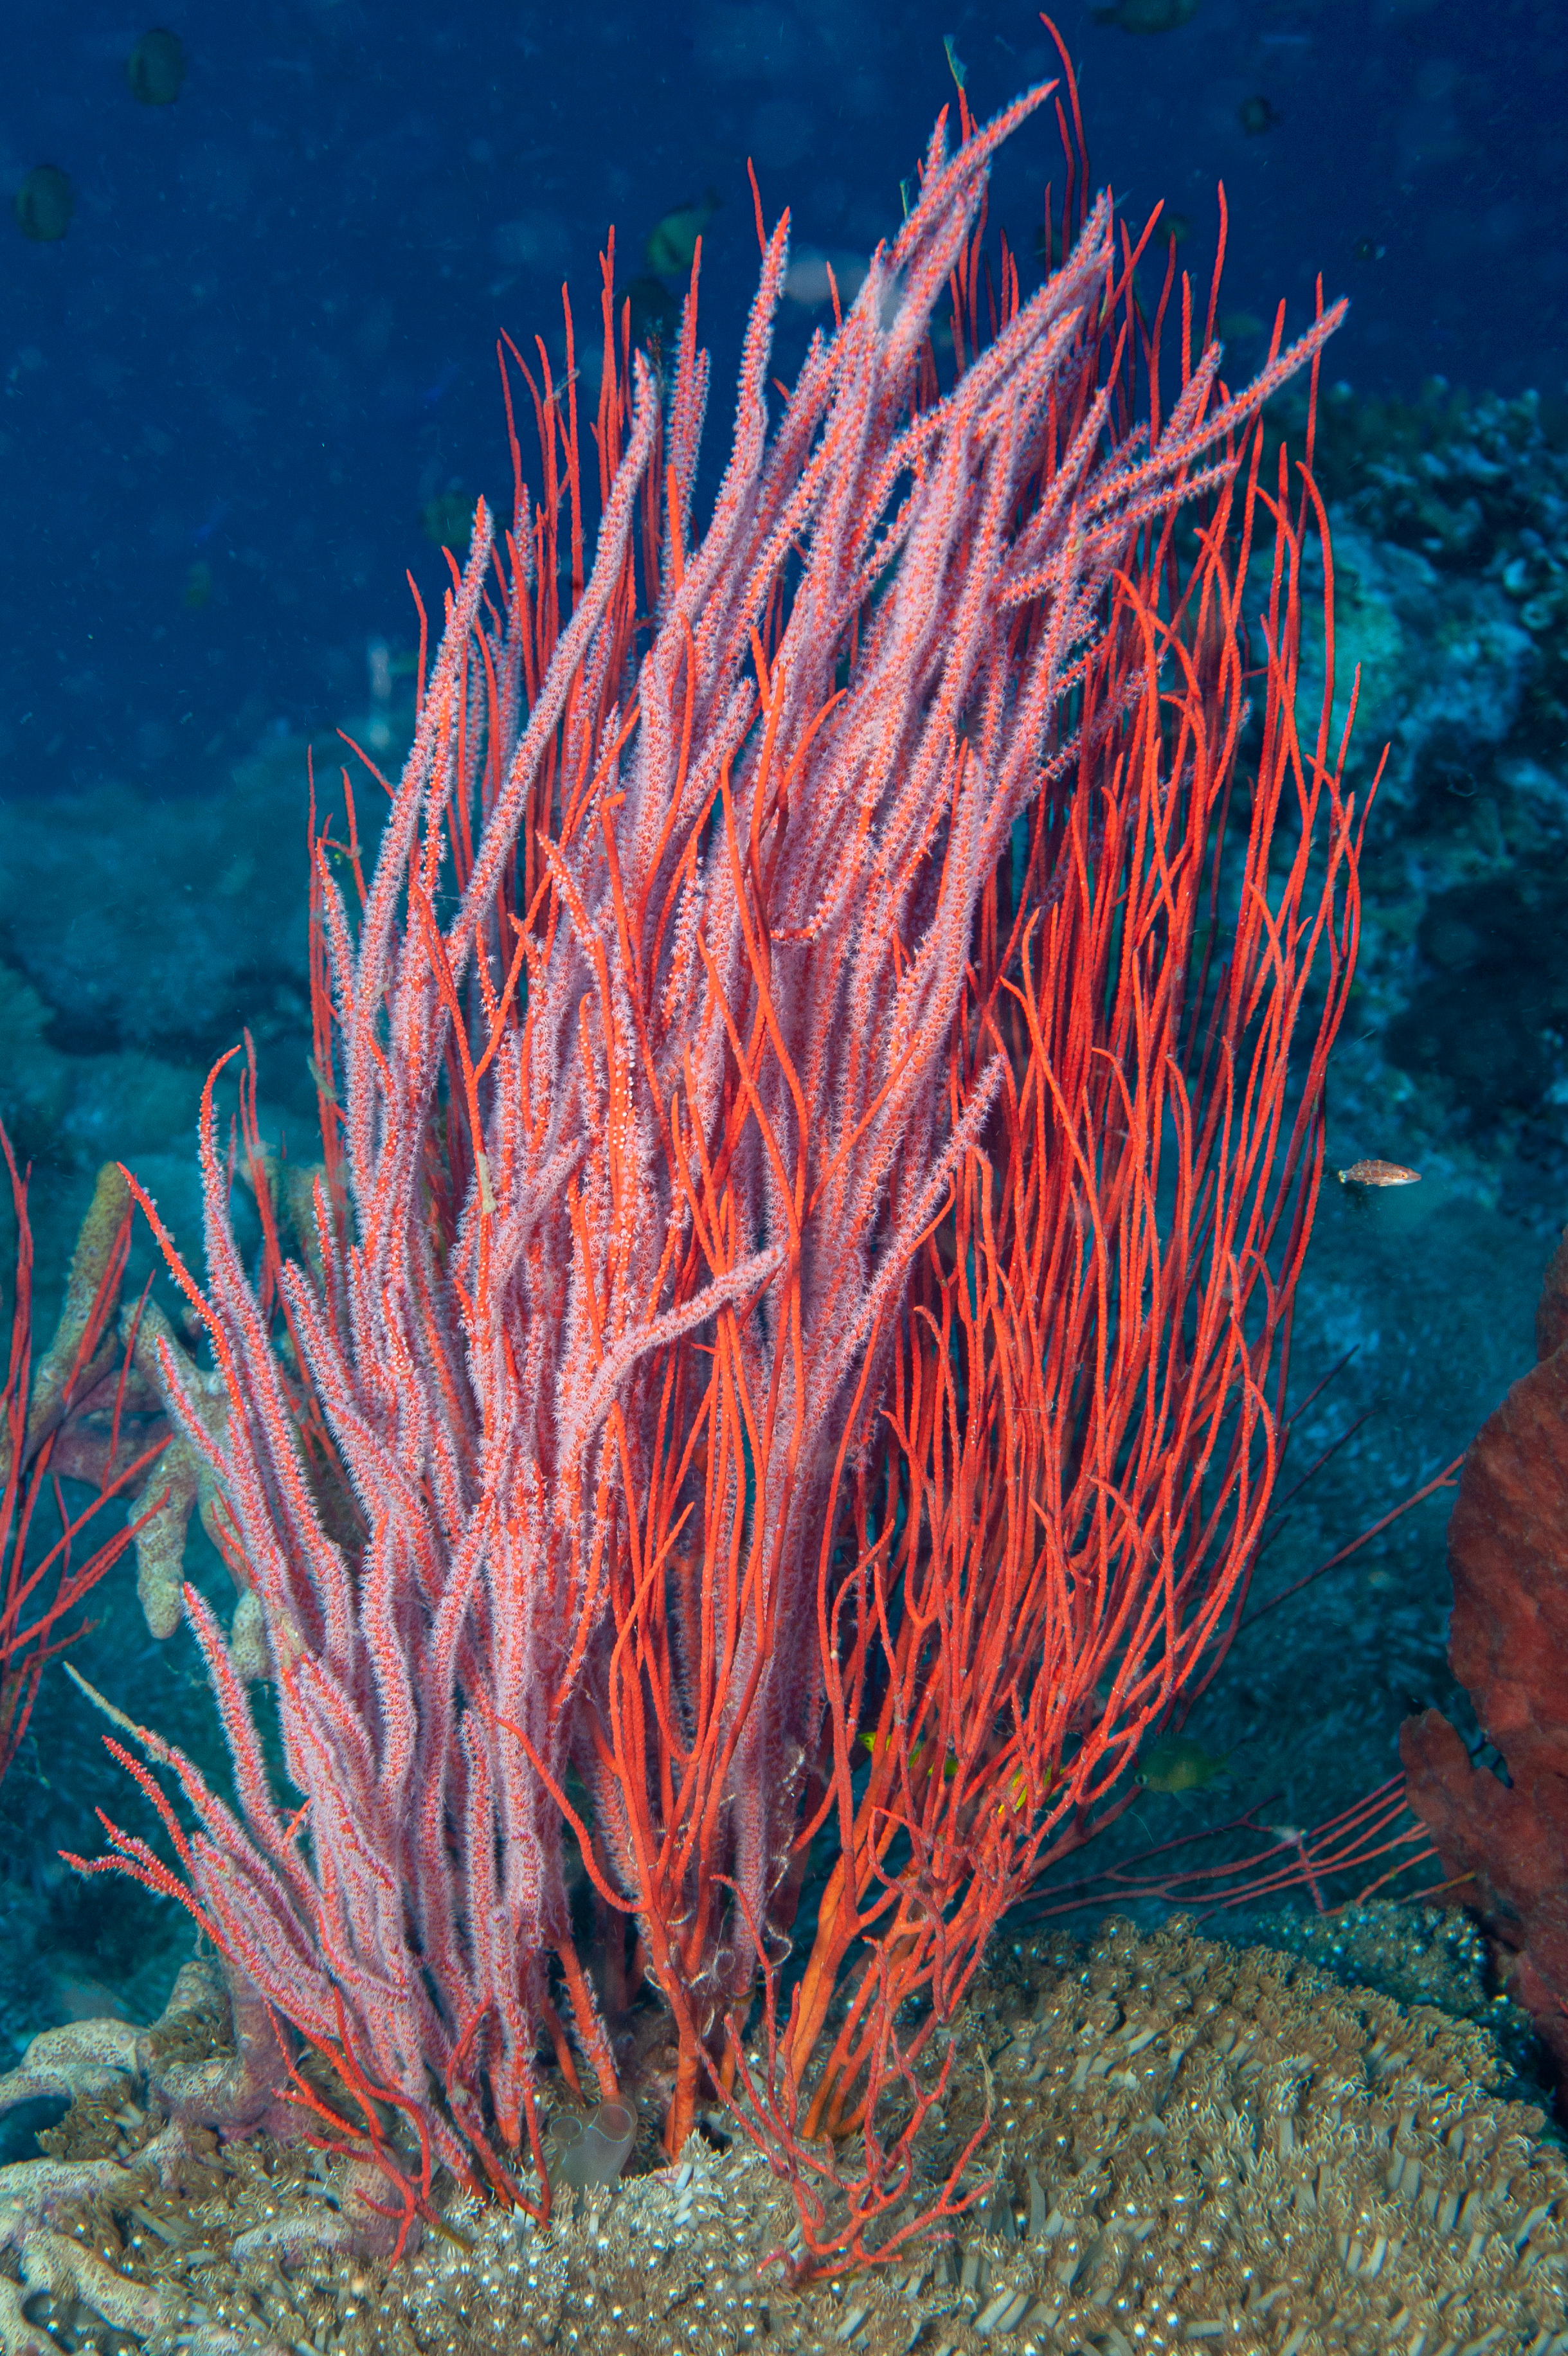 Red whip coral - Ellisella ceratophyta, Jayne's Gully, Father's Reefs